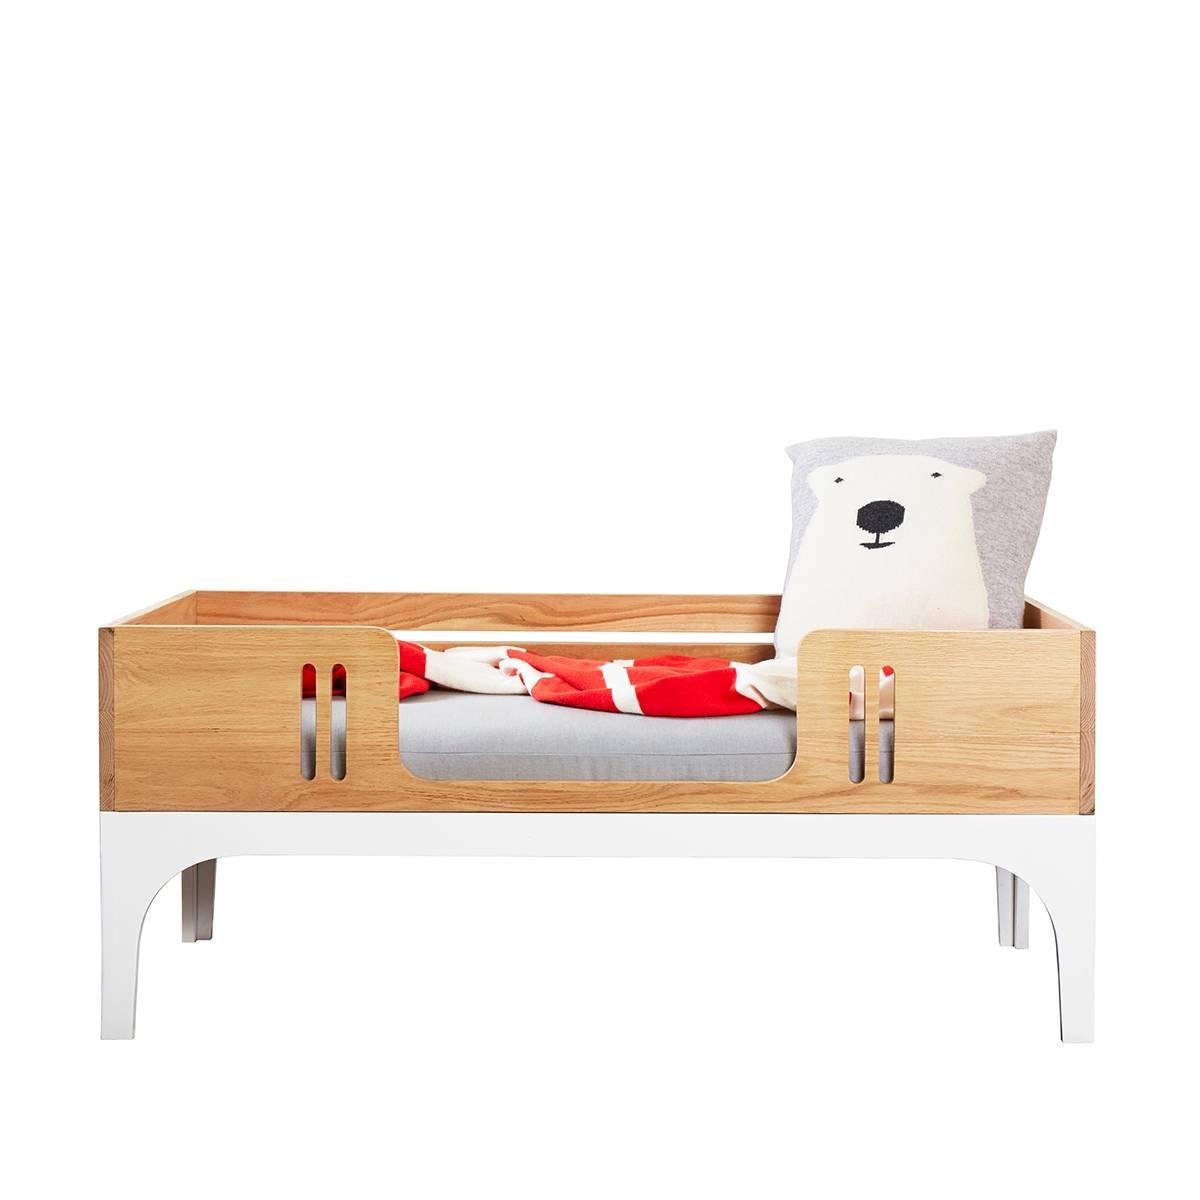 Coco Toddler Daybed Children's Furniture Set in Solid Ash and White Lacquer For Sale